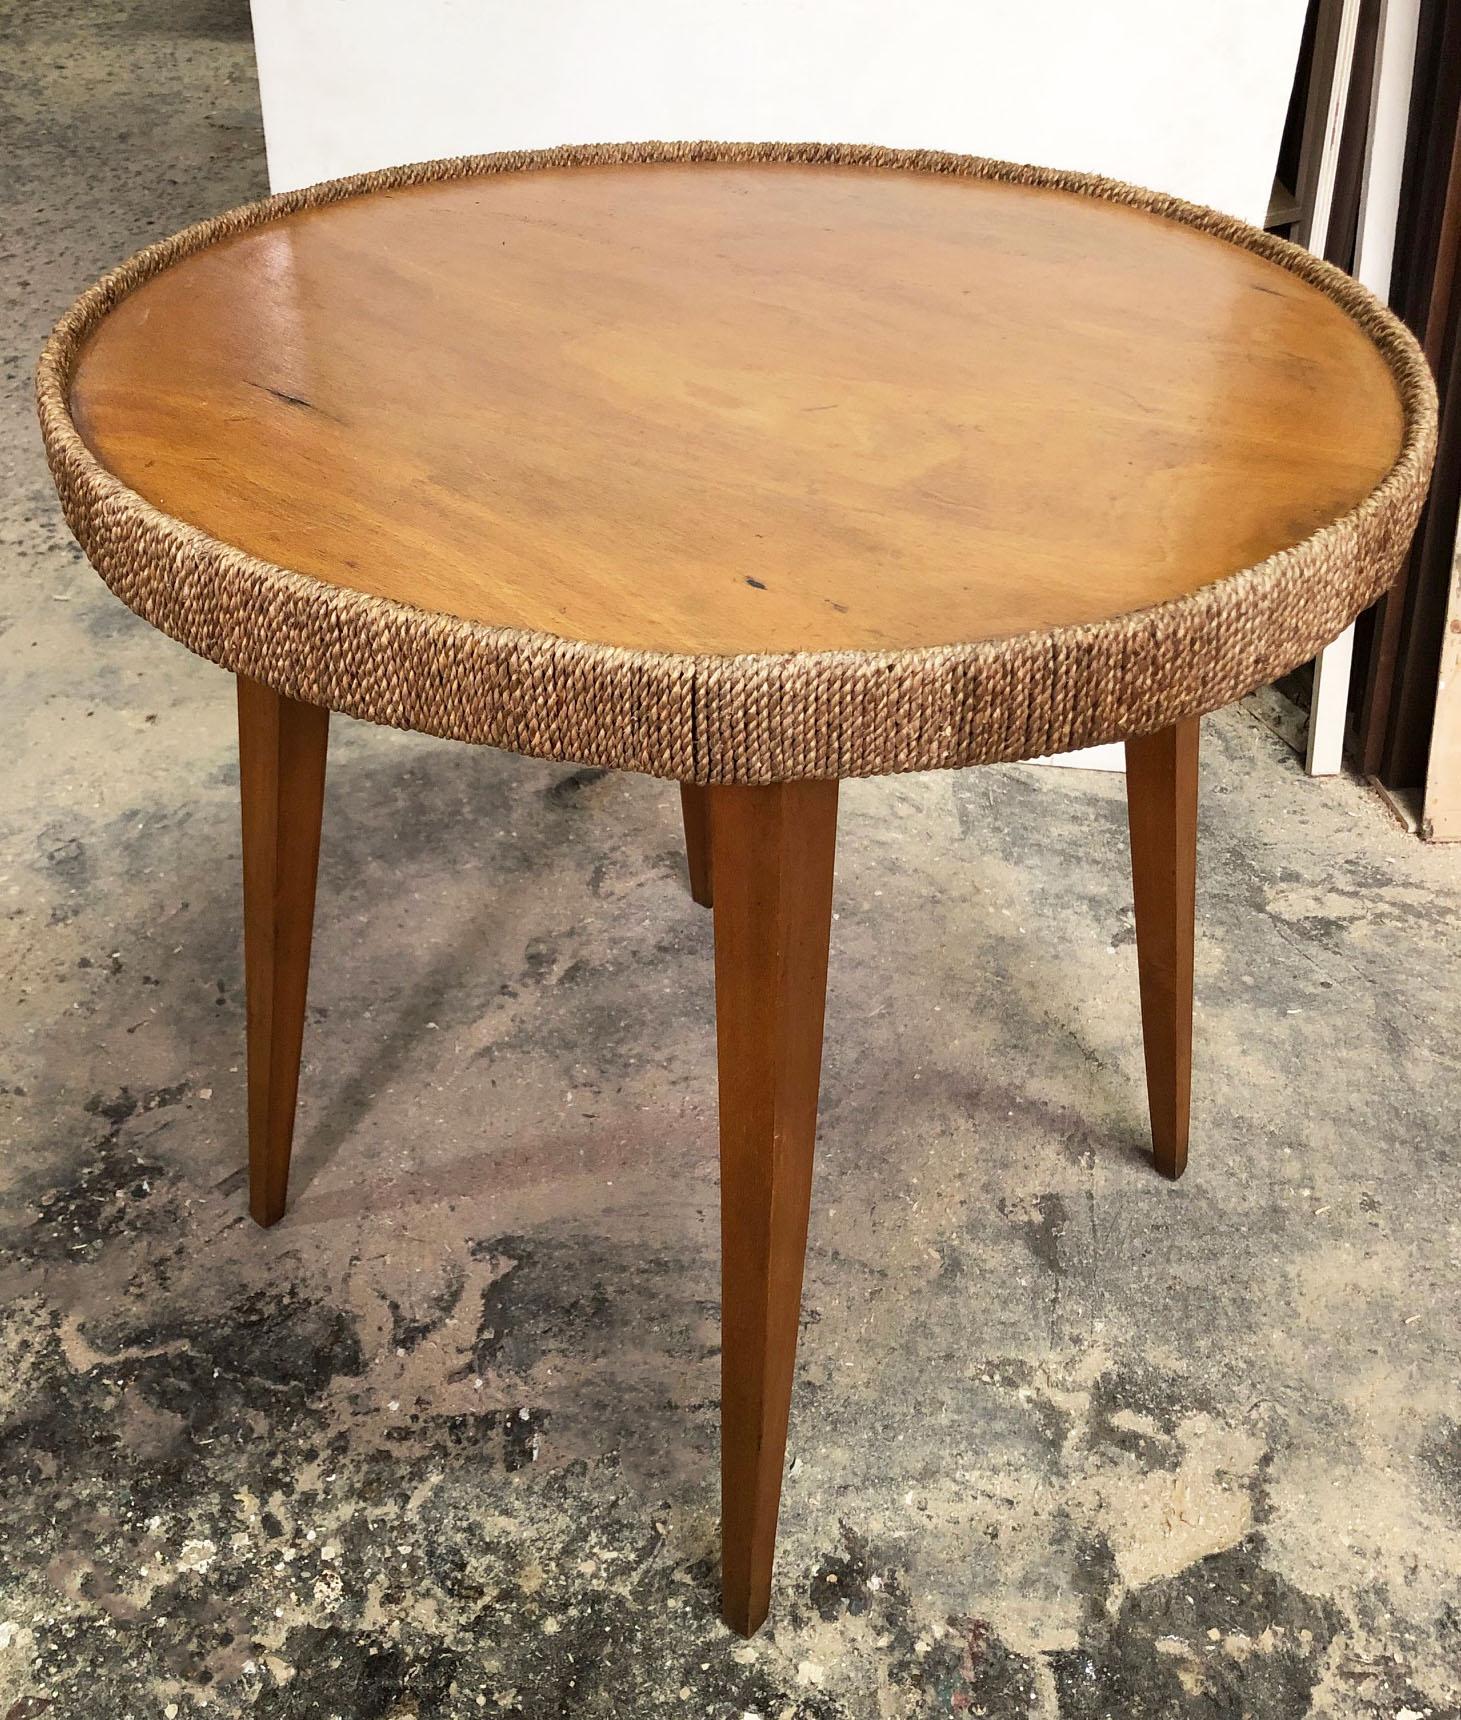 Mid-Century Modern Italian Sofa Table from 1970s, in Beechwood, Round with Rope Edge Trim